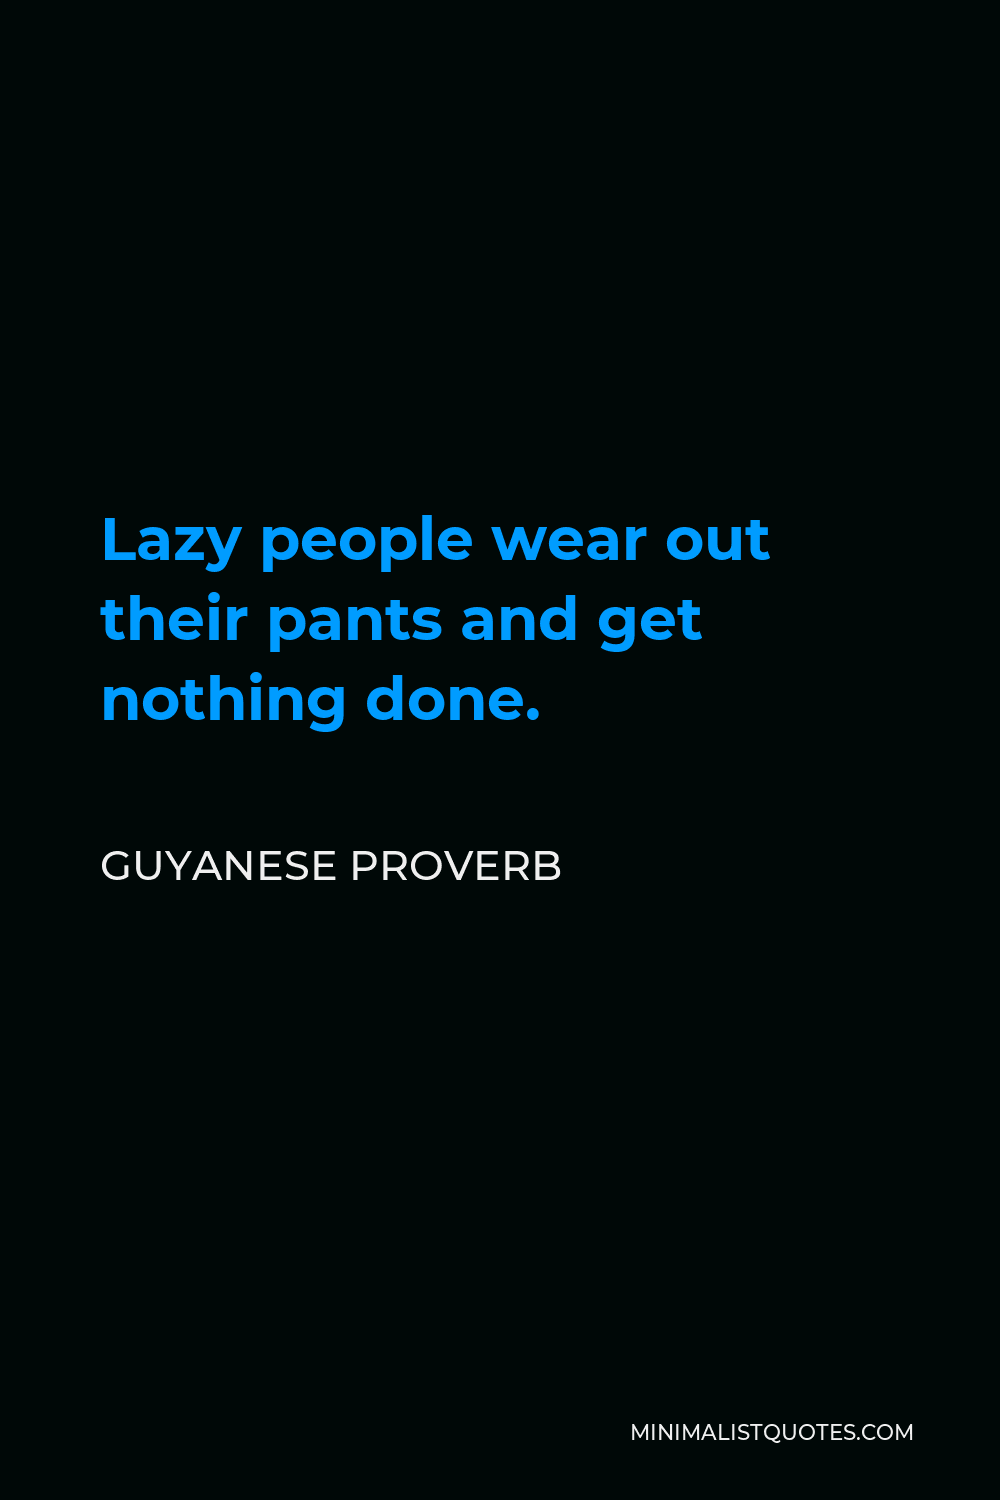 Guyanese Proverb Quote - Lazy people wear out their pants and get nothing done.